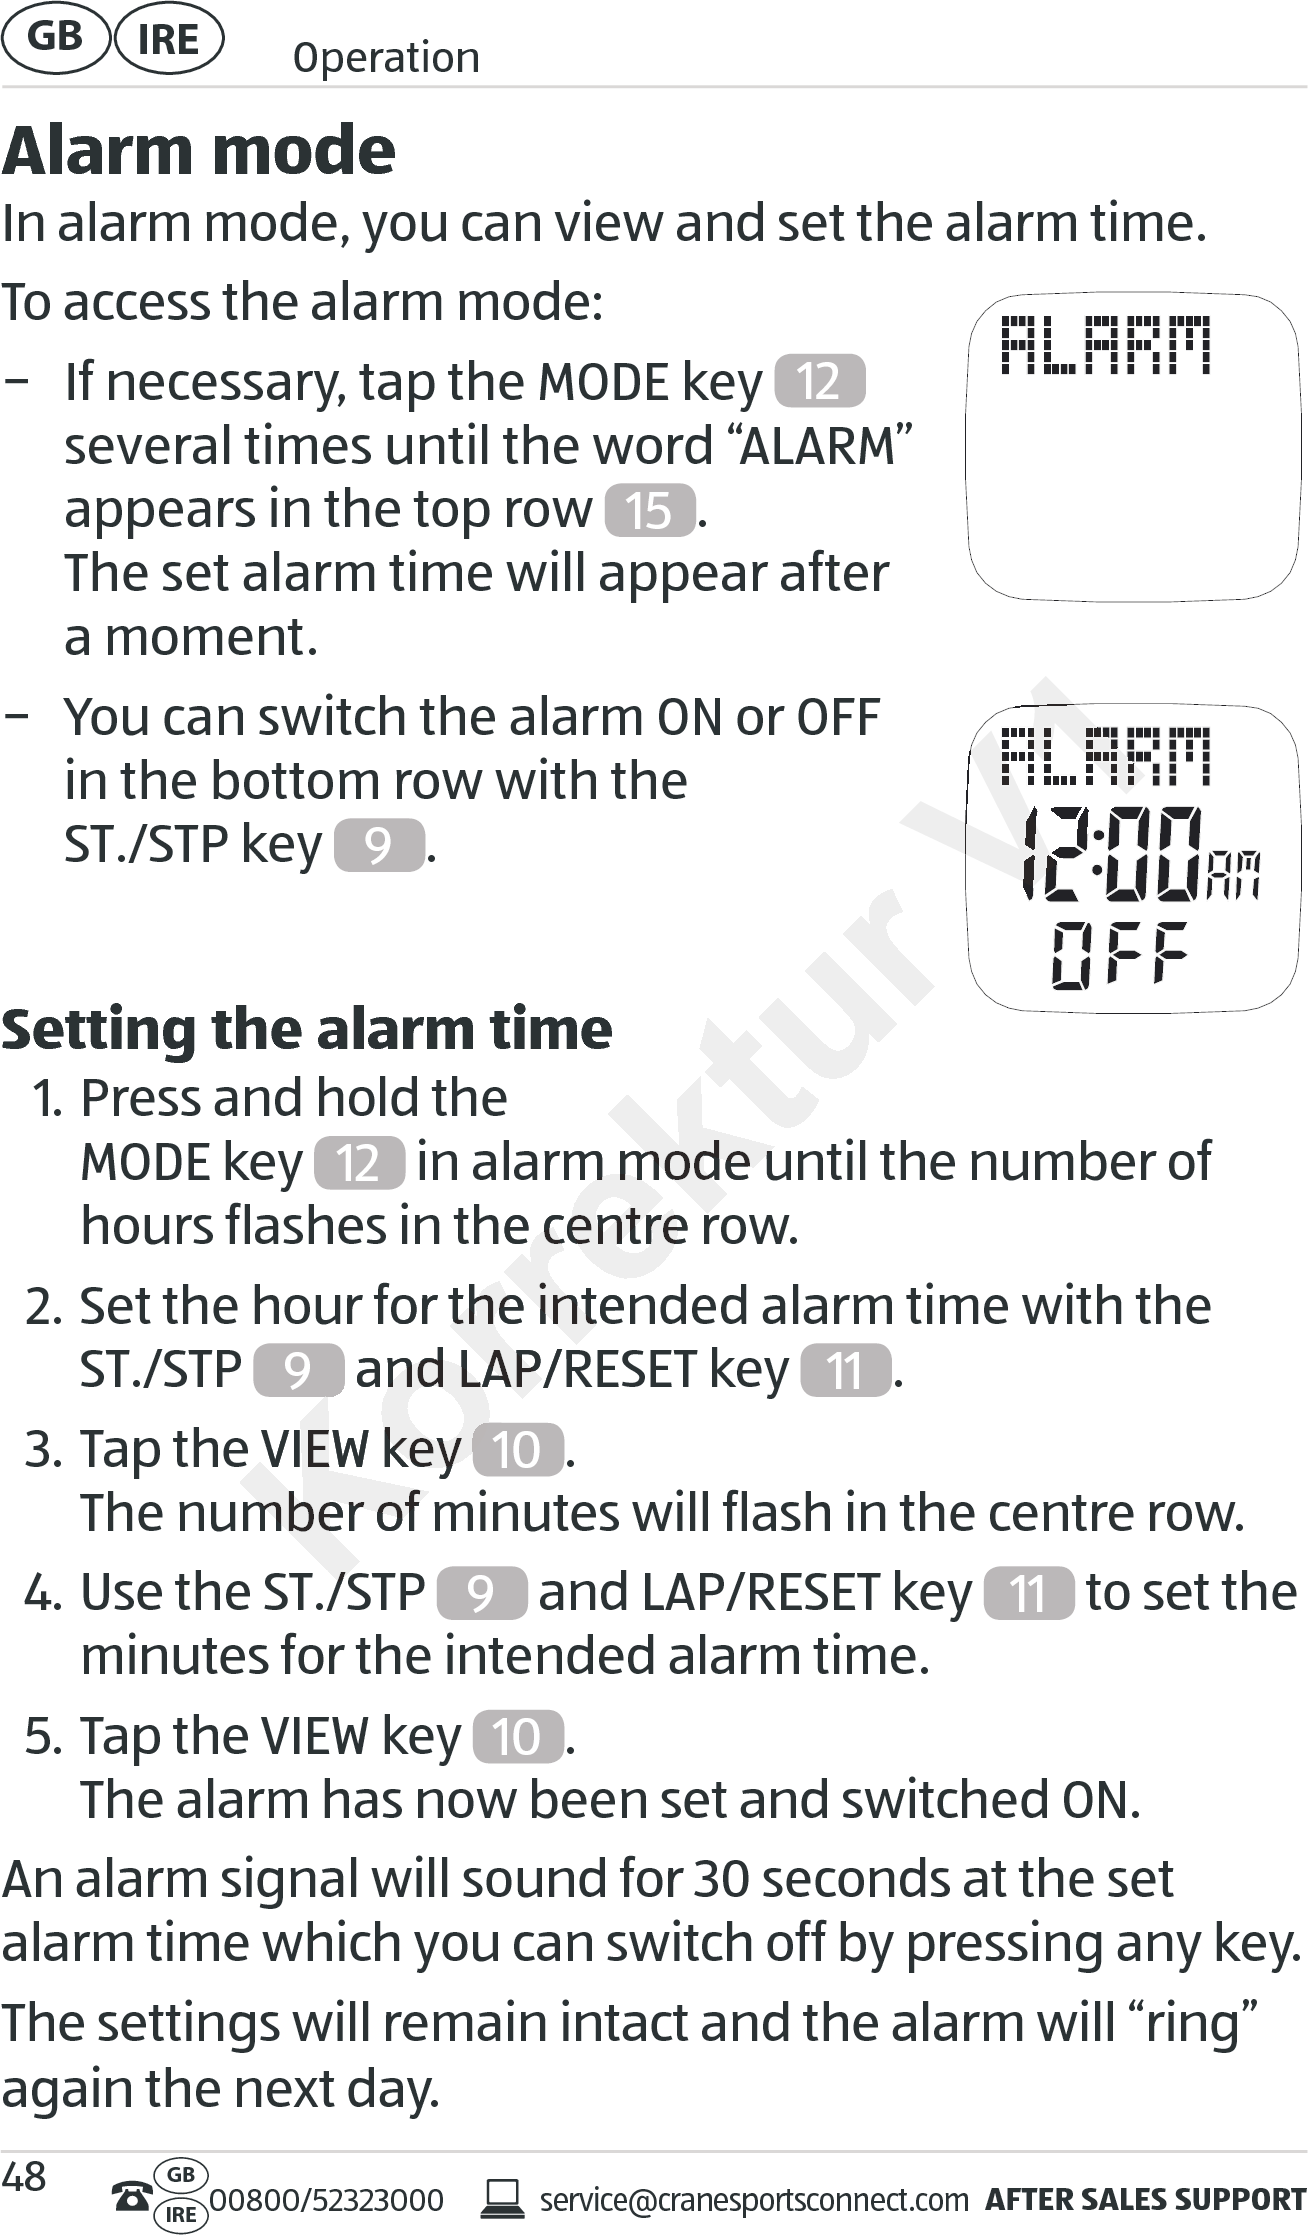 AFTER SALES SUPPORTservice@cranesportsconnect.comGBIRE 00800/52323000IRE OperationGB 48Alarm modeIn alarm mode, you can view and set the alarm time.To access the alarm mode: − If necessary, tap the MODE key  12   several times until the word “ALARM” appears in the top row  15 . The set alarm time will appear after  a moment. − You can switch the alarm ON or OFF  in the bottom row with the  ST./STP key  9. Setting the alarm time1. Press and hold the  MODE key 12  in alarm mode until the number of hours flashes in the centre row.2. Set the hour for the intended alarm time with the  ST./STP  9 and LAP/RESET key  11 .3. Tap the VIEW key  10 . The number of minutes will flash in the centre row.4. Use the ST./STP  9 and LAP/RESET key  11  to set the minutes for the intended alarm time.5. Tap the VIEW key  10 . The alarm has now been set and switched ON.An alarm signal will sound for 30 seconds at the set alarm time which you can switch off by pressing any key.The settings will remain intact and the alarm will “ring” again the next day. in alarm mode until the number of  in alarm mode until the number of hours flashes in the centre row.hours flashes in the centre row.Set the hour for the intended alarm time with theSet the hour for the intended alarm time with theKorrektur  and LAP/RESET key  and LAP/RESET key Tap the Tap the VIEW key VIEW key Korrektur The number of minutes will flash in the centre row.The number of minutes will flash in the centre row.Use the ST./SUse the ST./SV1V1V1V1V1V1V1V1V1V1V1V1V1V1V1V1V1V1V1V1V1V1V1V1V1V1V1V1V1V1V1V1V1V1V1V1V1V1V1V1V1V1V1V1V1V1V1V1V1V1V1V1V1V1V1V1V1V1V1V1V1V1V1V1V1V1V1V1V1V1V1V1V1V1V1V1V1V1V1V1V1V1V1V1V1V1V1V1V1V1V1V1V1V1V1V1V1V1V1V1V1